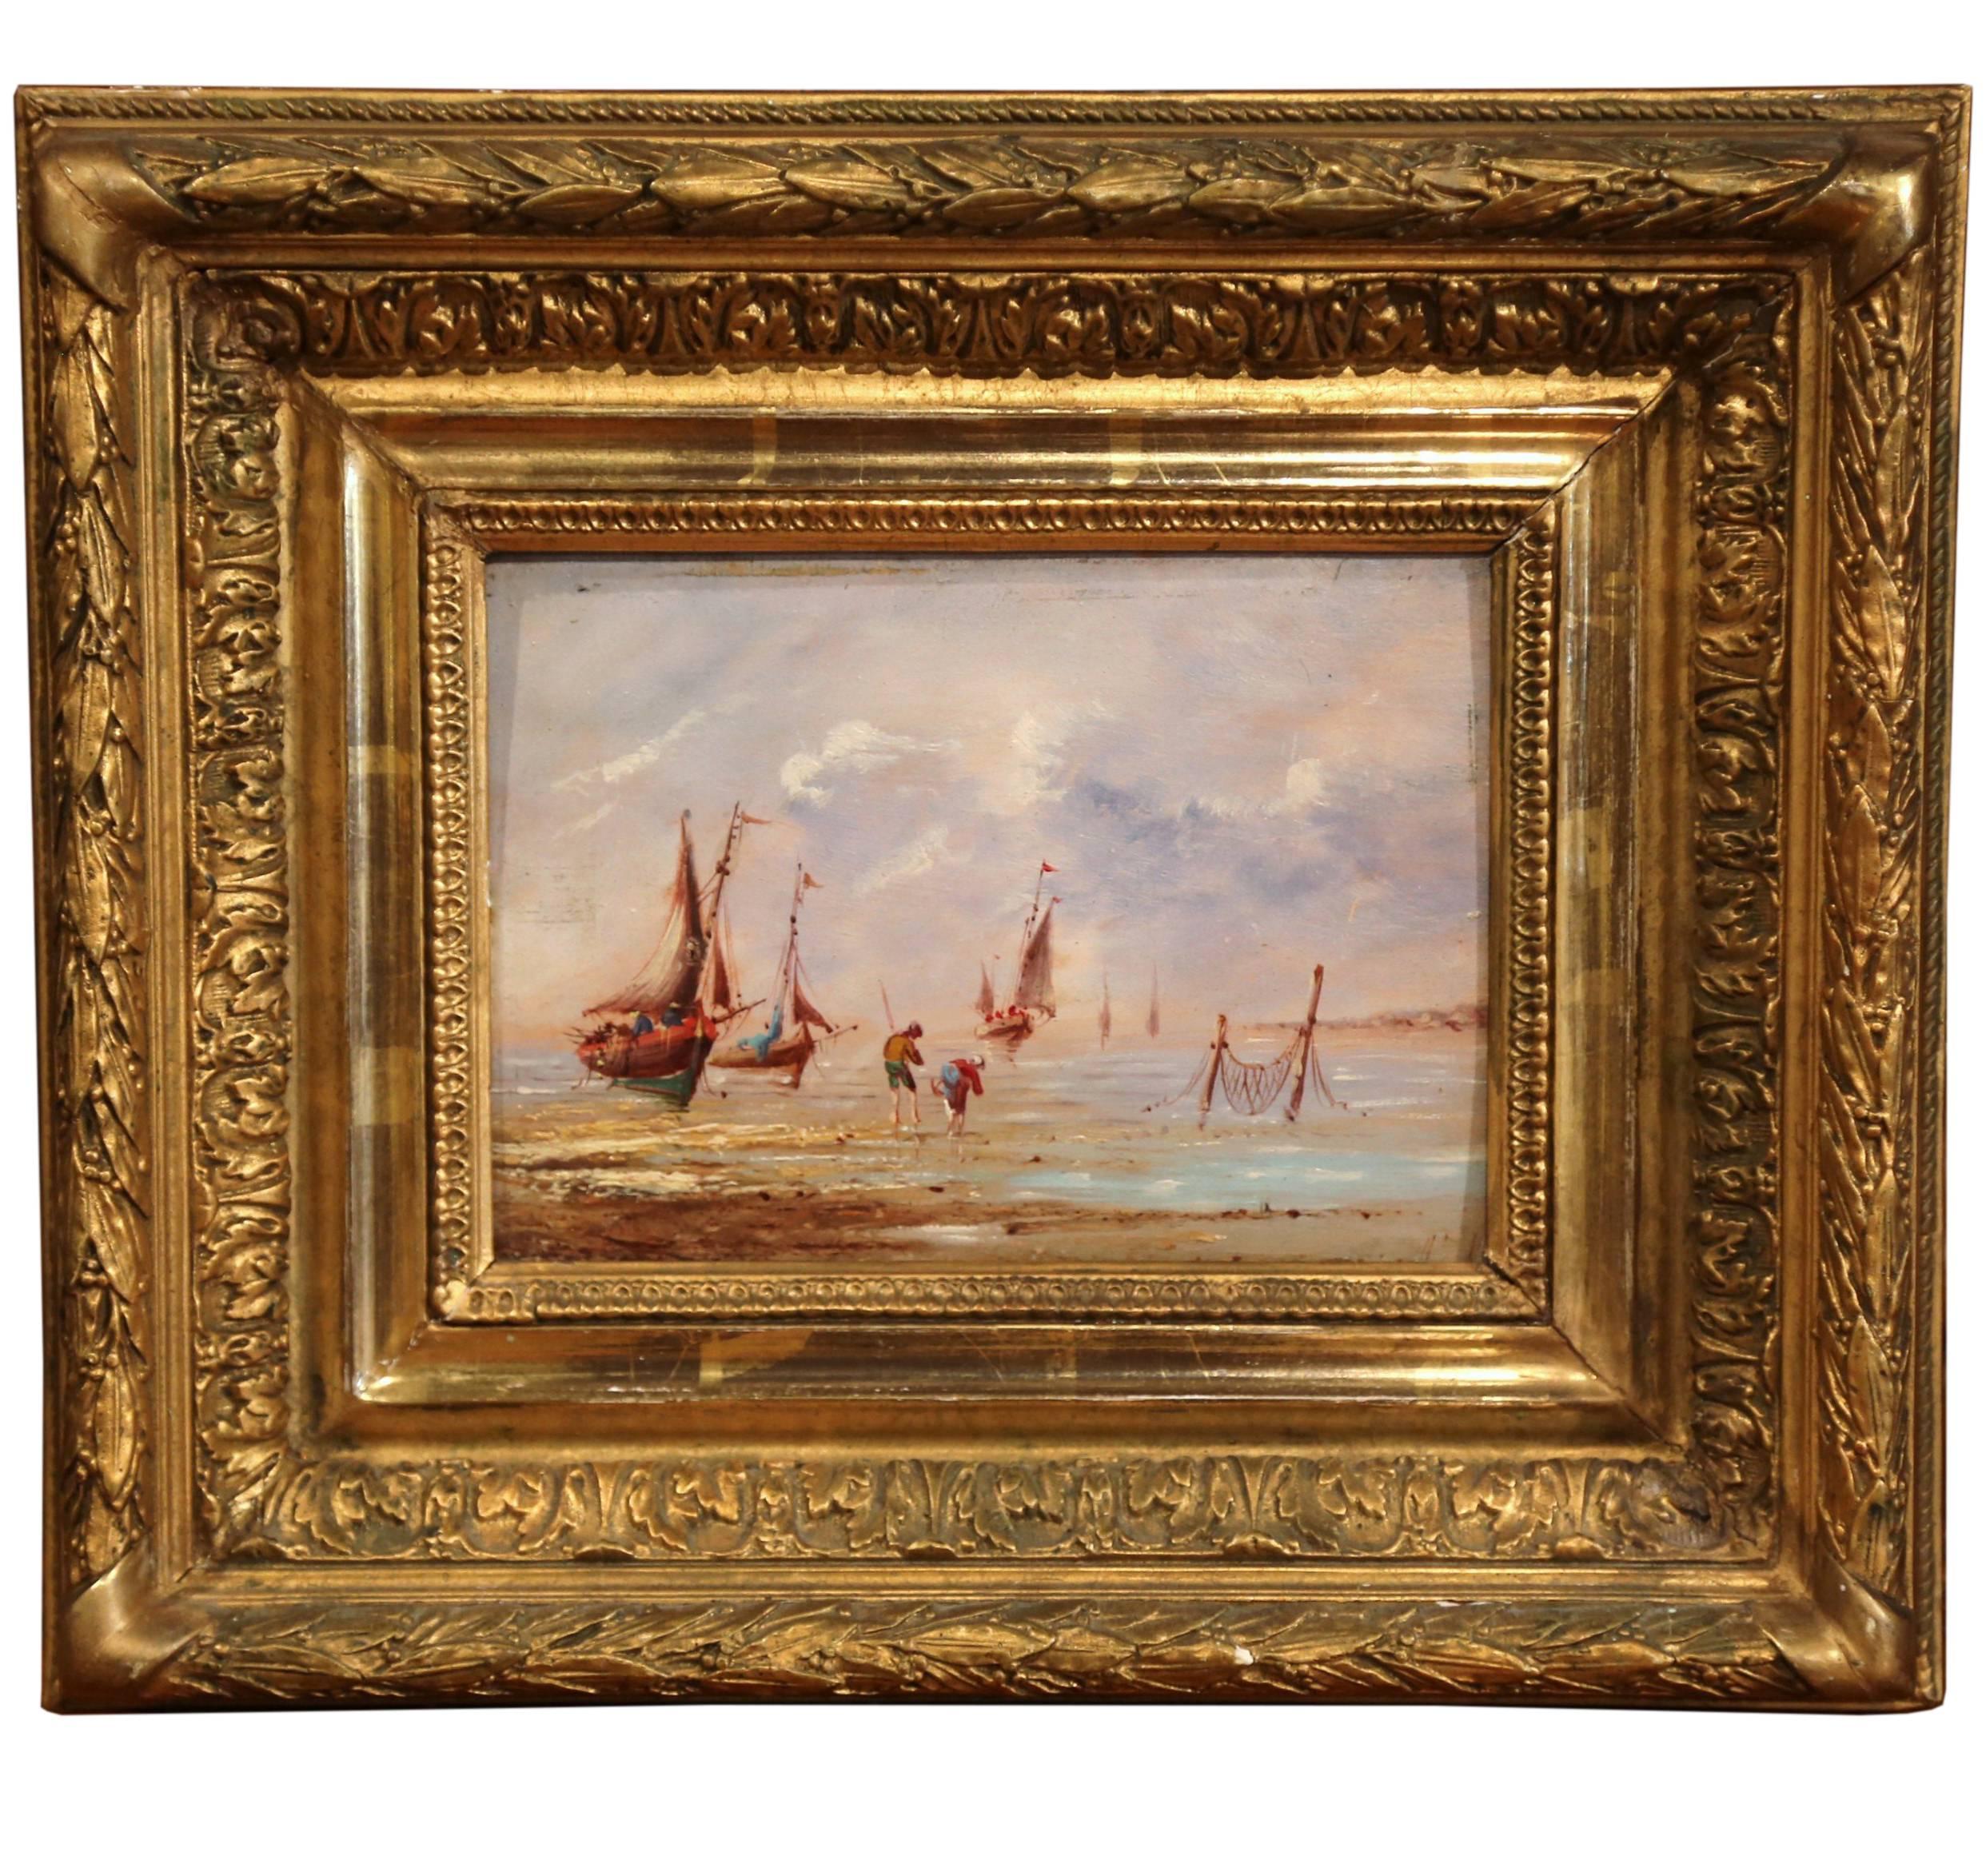 Unknown Landscape Painting - 19th Century French Oil on Board Beach Painting in Carved Gilt Wood Frame